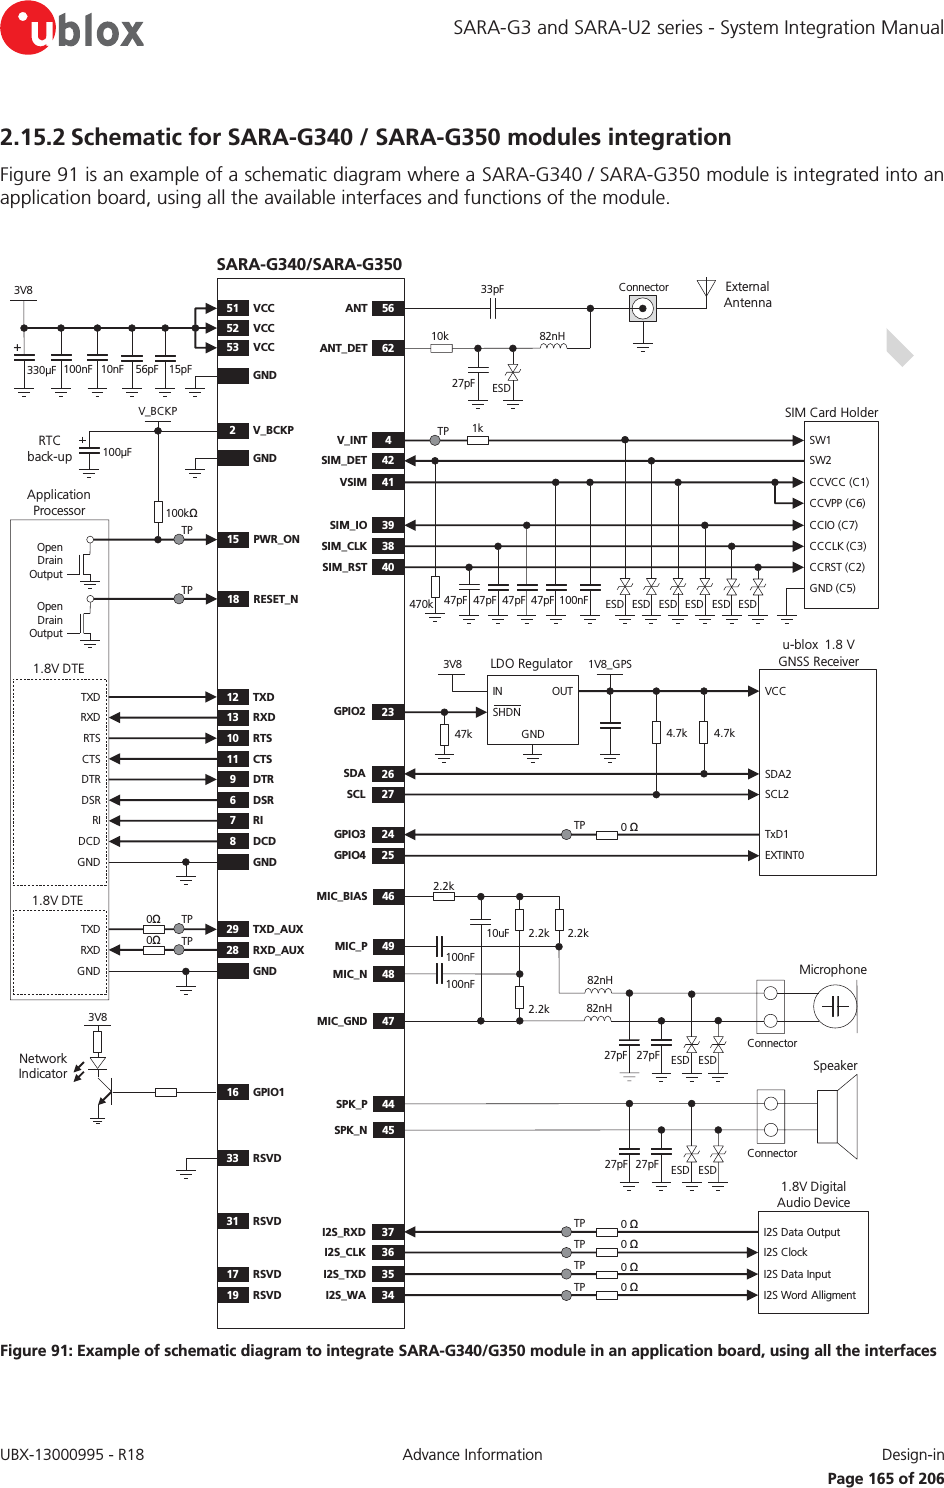 SARA-G3 and SARA-U2 series - System Integration Manual UBX-13000995 - R18  Advance Information  Design-in   Page 165 of 206 2.15.2 Schematic for SARA-G340 / SARA-G350 modules integration Figure 91 is an example of a schematic diagram where a SARA-G340 / SARA-G350 module is integrated into an application board, using all the available interfaces and functions of the module.  TXDRXDRTSCTSDTRDSRRIDCDGND12 TXD9DTR13 RXD10 RTS11 CTS6DSR7RI8DCDGND3V8GND330μF 10nF100nF 56pFSARA-G340/SARA-G35052 VCC53 VCC51 VCC+100μF2V_BCKPGND GNDGNDRTC back-up1.8V DTE1.8V DTE16 GPIO13V8Network Indicator18 RESET_NApplication ProcessorOpen Drain Output15 PWR_ON100kΩOpen Drain OutputTXDRXD29 TXD_AUX28 RXD_AUX0Ω0ΩTPTPu-blox  1.8 V GNSS Receiver4.7kOUTINGNDLDO RegulatorSHDNSDASCL4.7k3V8 1V8_GPSSDA2SCL2GPIO3GPIO4TxD1EXTINT02627242547kVCCGPIO2 231.8V Digital Audio DeviceI2S_RXDI2S_CLKI2S Data OutputI2S ClockI2S_TXDI2S_WAI2S Data InputI2S Word Alligment3736353449MIC_P2.2k2.2k 2.2k48MIC_N2.2k10uF46MIC_BIAS47MIC_GND100nF100nF44SPK_P45SPK_N82nH82nH27pF27pFConnectorMicrophoneESDESD27pF 27pFSpeakerConnectorESD ESD15pF33 RSVD31 RSVD17 RSVD19 RSVD47pFSIM Card HolderCCVCC (C1)CCVPP (C6)CCIO (C7)CCCLK (C3)CCRST (C2)GND (C5)47pF 47pF 100nF41VSIM39SIM_IO38SIM_CLK40SIM_RST47pFSW1 SW24V_INT42SIM_DET470k ESD ESD ESD ESD ESD ESD56ANT62ANT_DET10k 82nH33pF Connector27pF ESDExternal AntennaV_BCKP1kTPTPTP0 Ω0 ΩTPTP0 Ω0 ΩTPTP0 ΩTP Figure 91: Example of schematic diagram to integrate SARA-G340/G350 module in an application board, using all the interfaces  